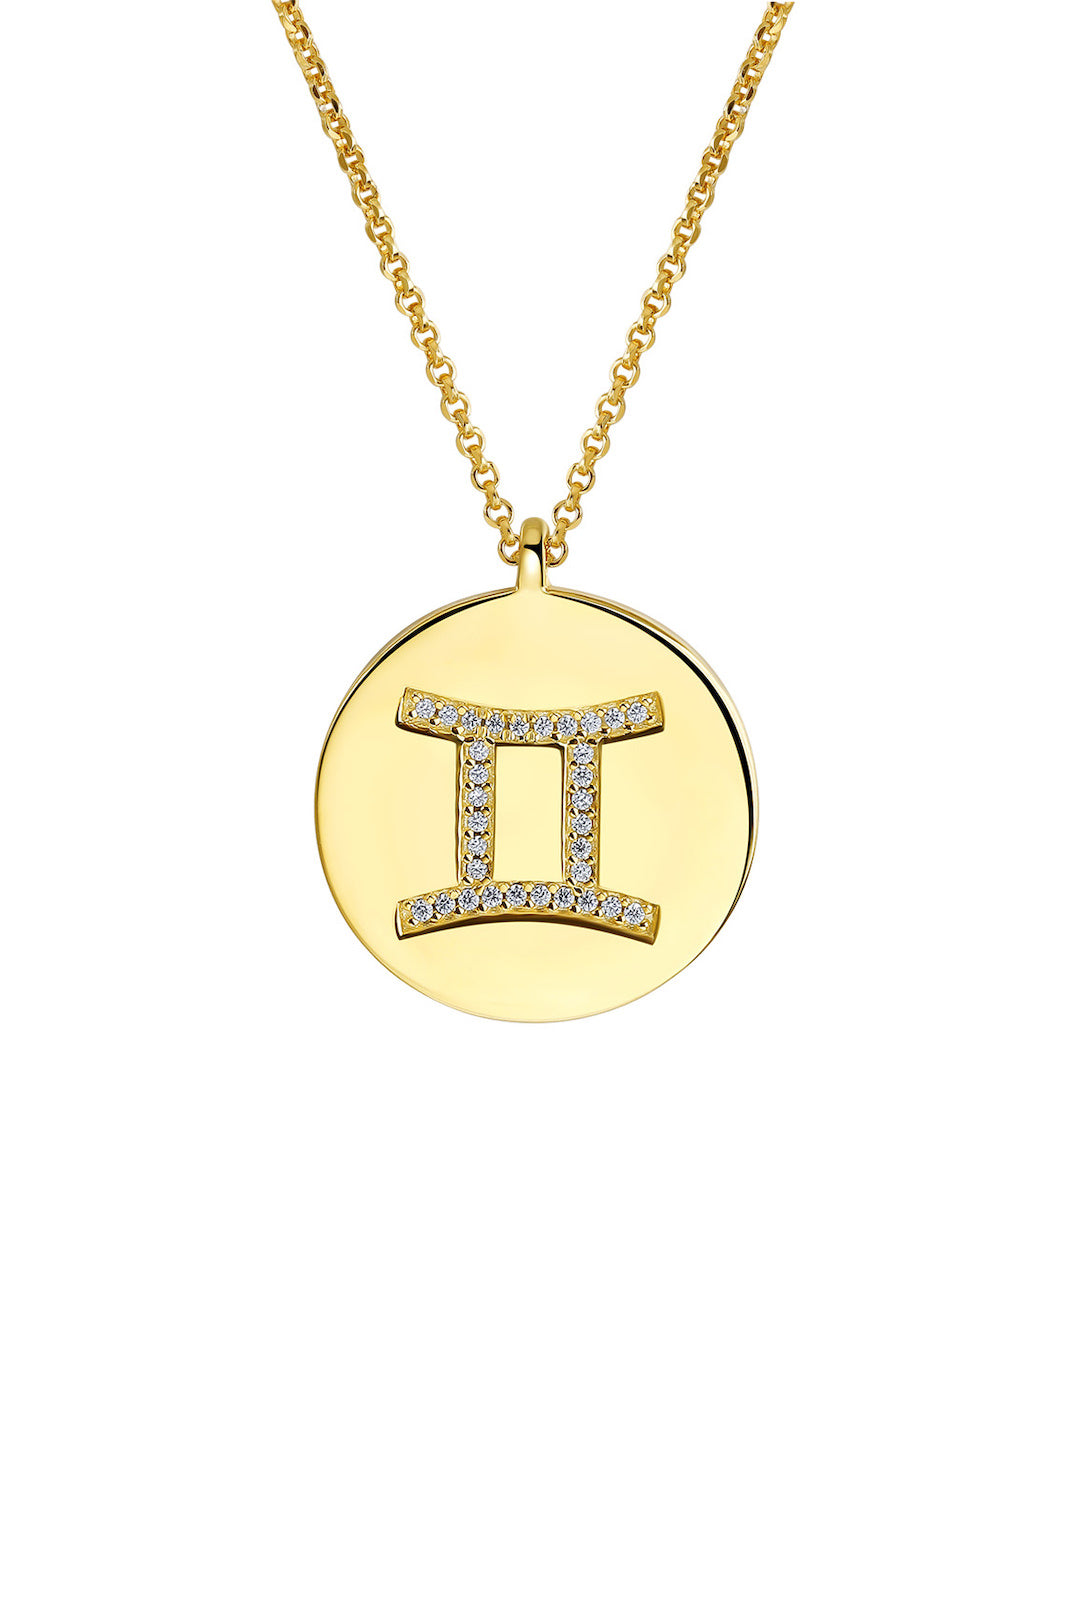 Gold Plated Silver Zodiac Necklace - Gemini Side VIEW